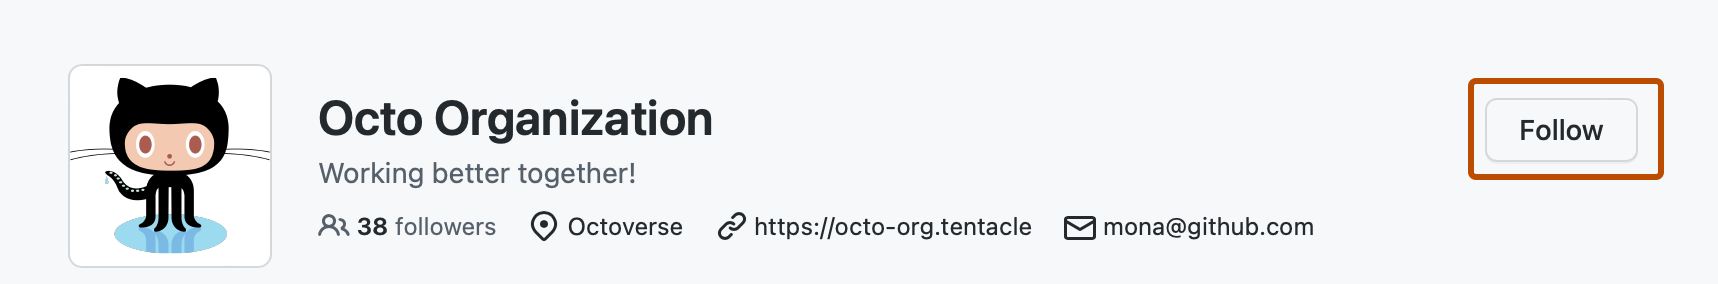 Screenshot of @octo-org's profile page. A button, labeled "Follow", is outlined in dark orange.